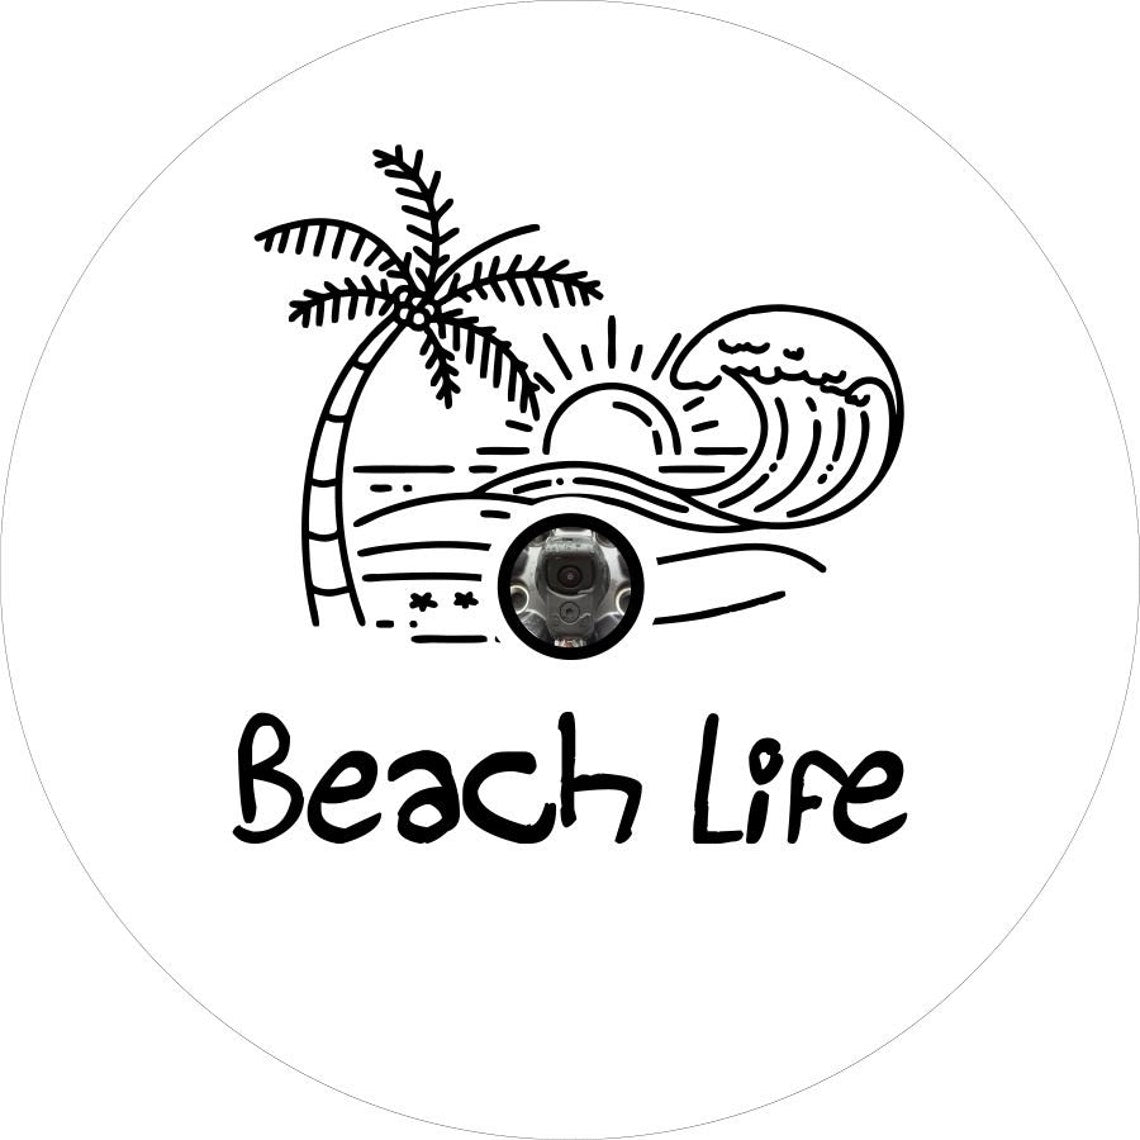 Hand-drawn simple beach scene design with waves and sunset & "beach life" written across the bottom. on white vinyl with back up camera for Jeep, Bronco, RV, Camper, Trailer, spare tire cover